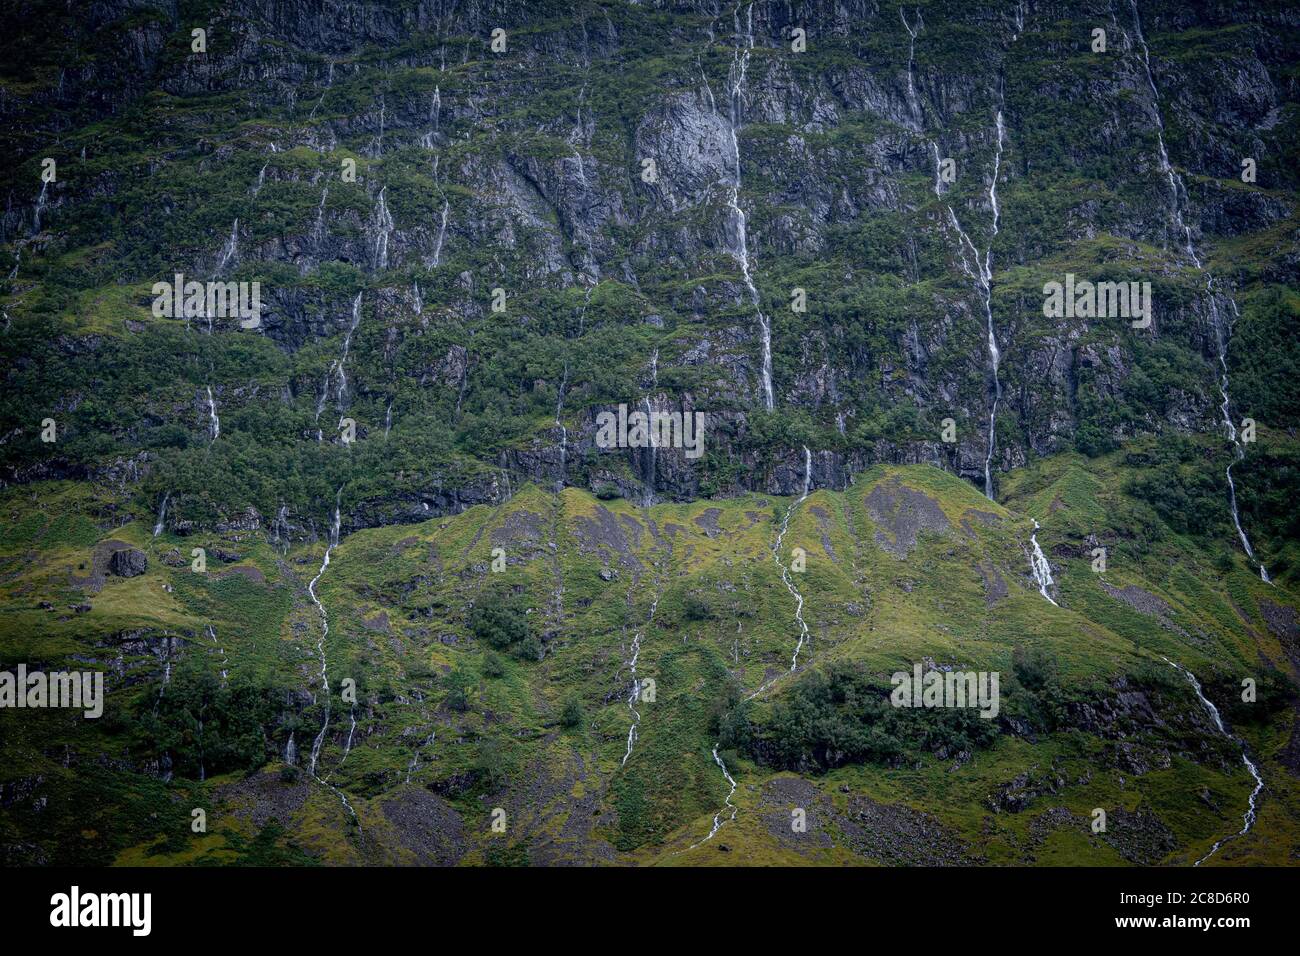 The Lush Green Cliff Face of a Scottish  Mountain in the Glens with Mini Waterfalls Stock Photo